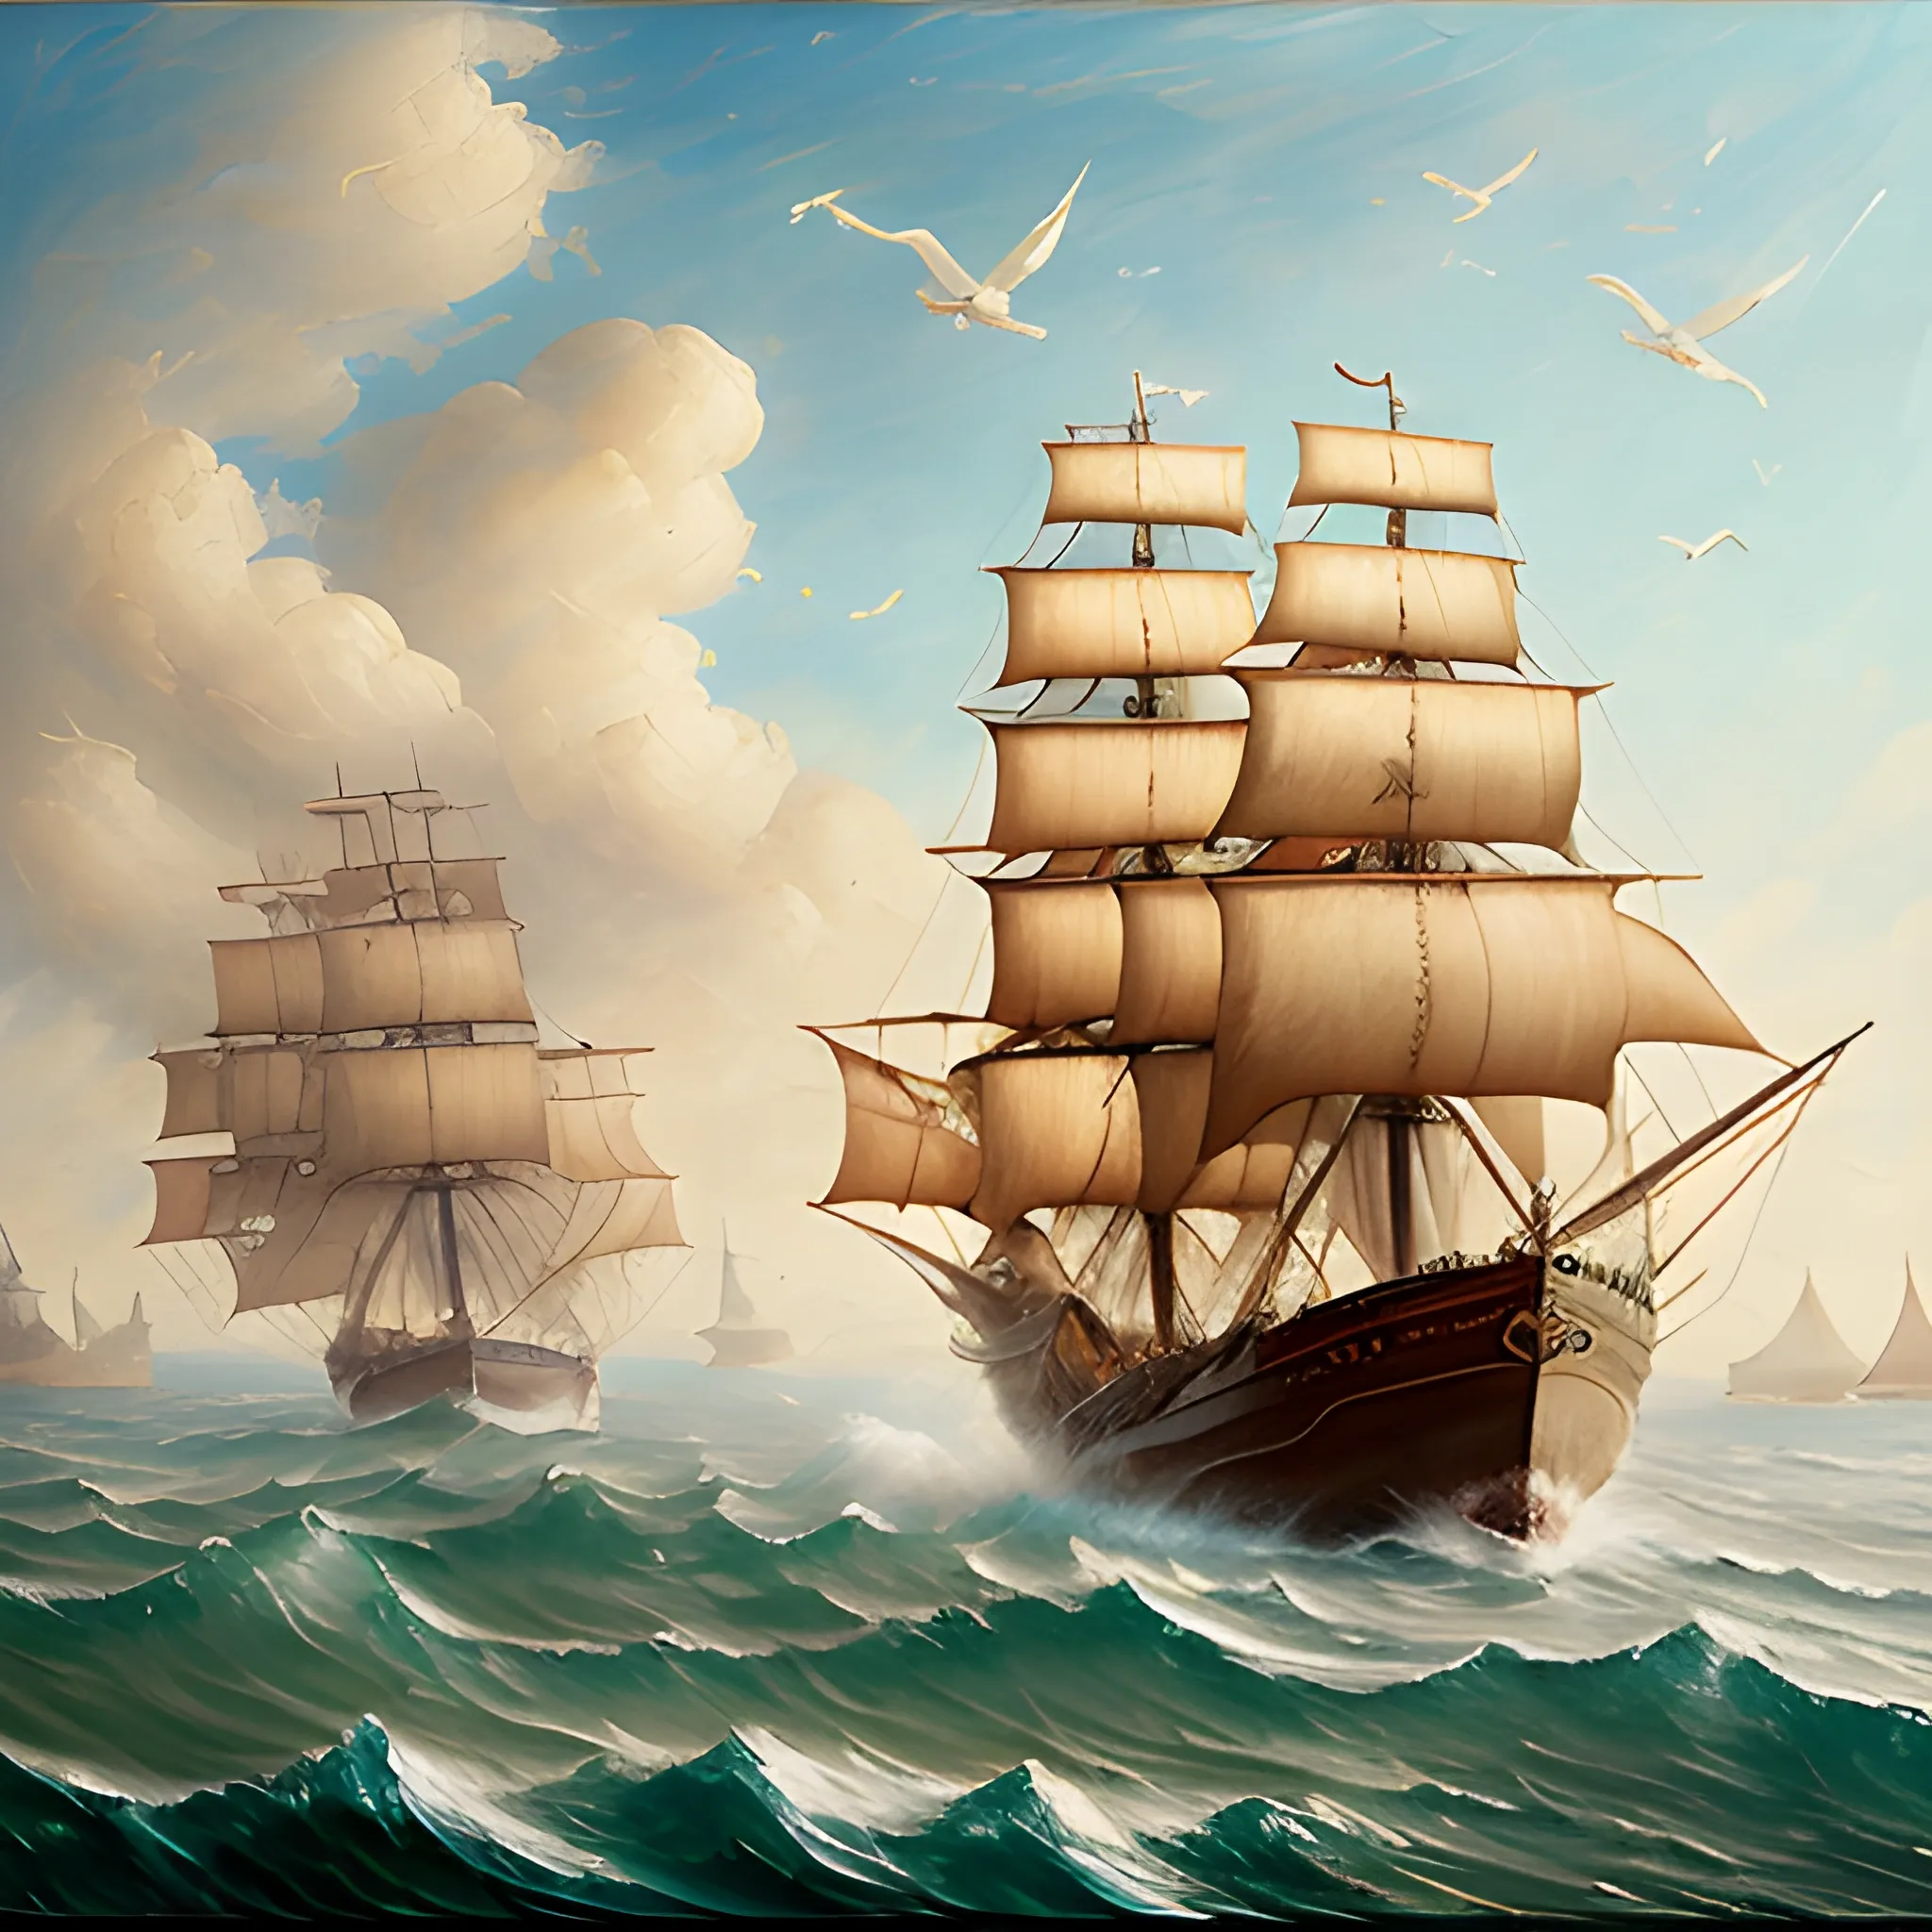 The back port side of a pirate ship sailing away in a wavy sea, thick burlap sails blown with the wind, large ship, full side view of the ship, view from the starboard side of the ship, Wonderful painting, Akihito Yoshida oil painting style, highly detailed,, Oil Painting